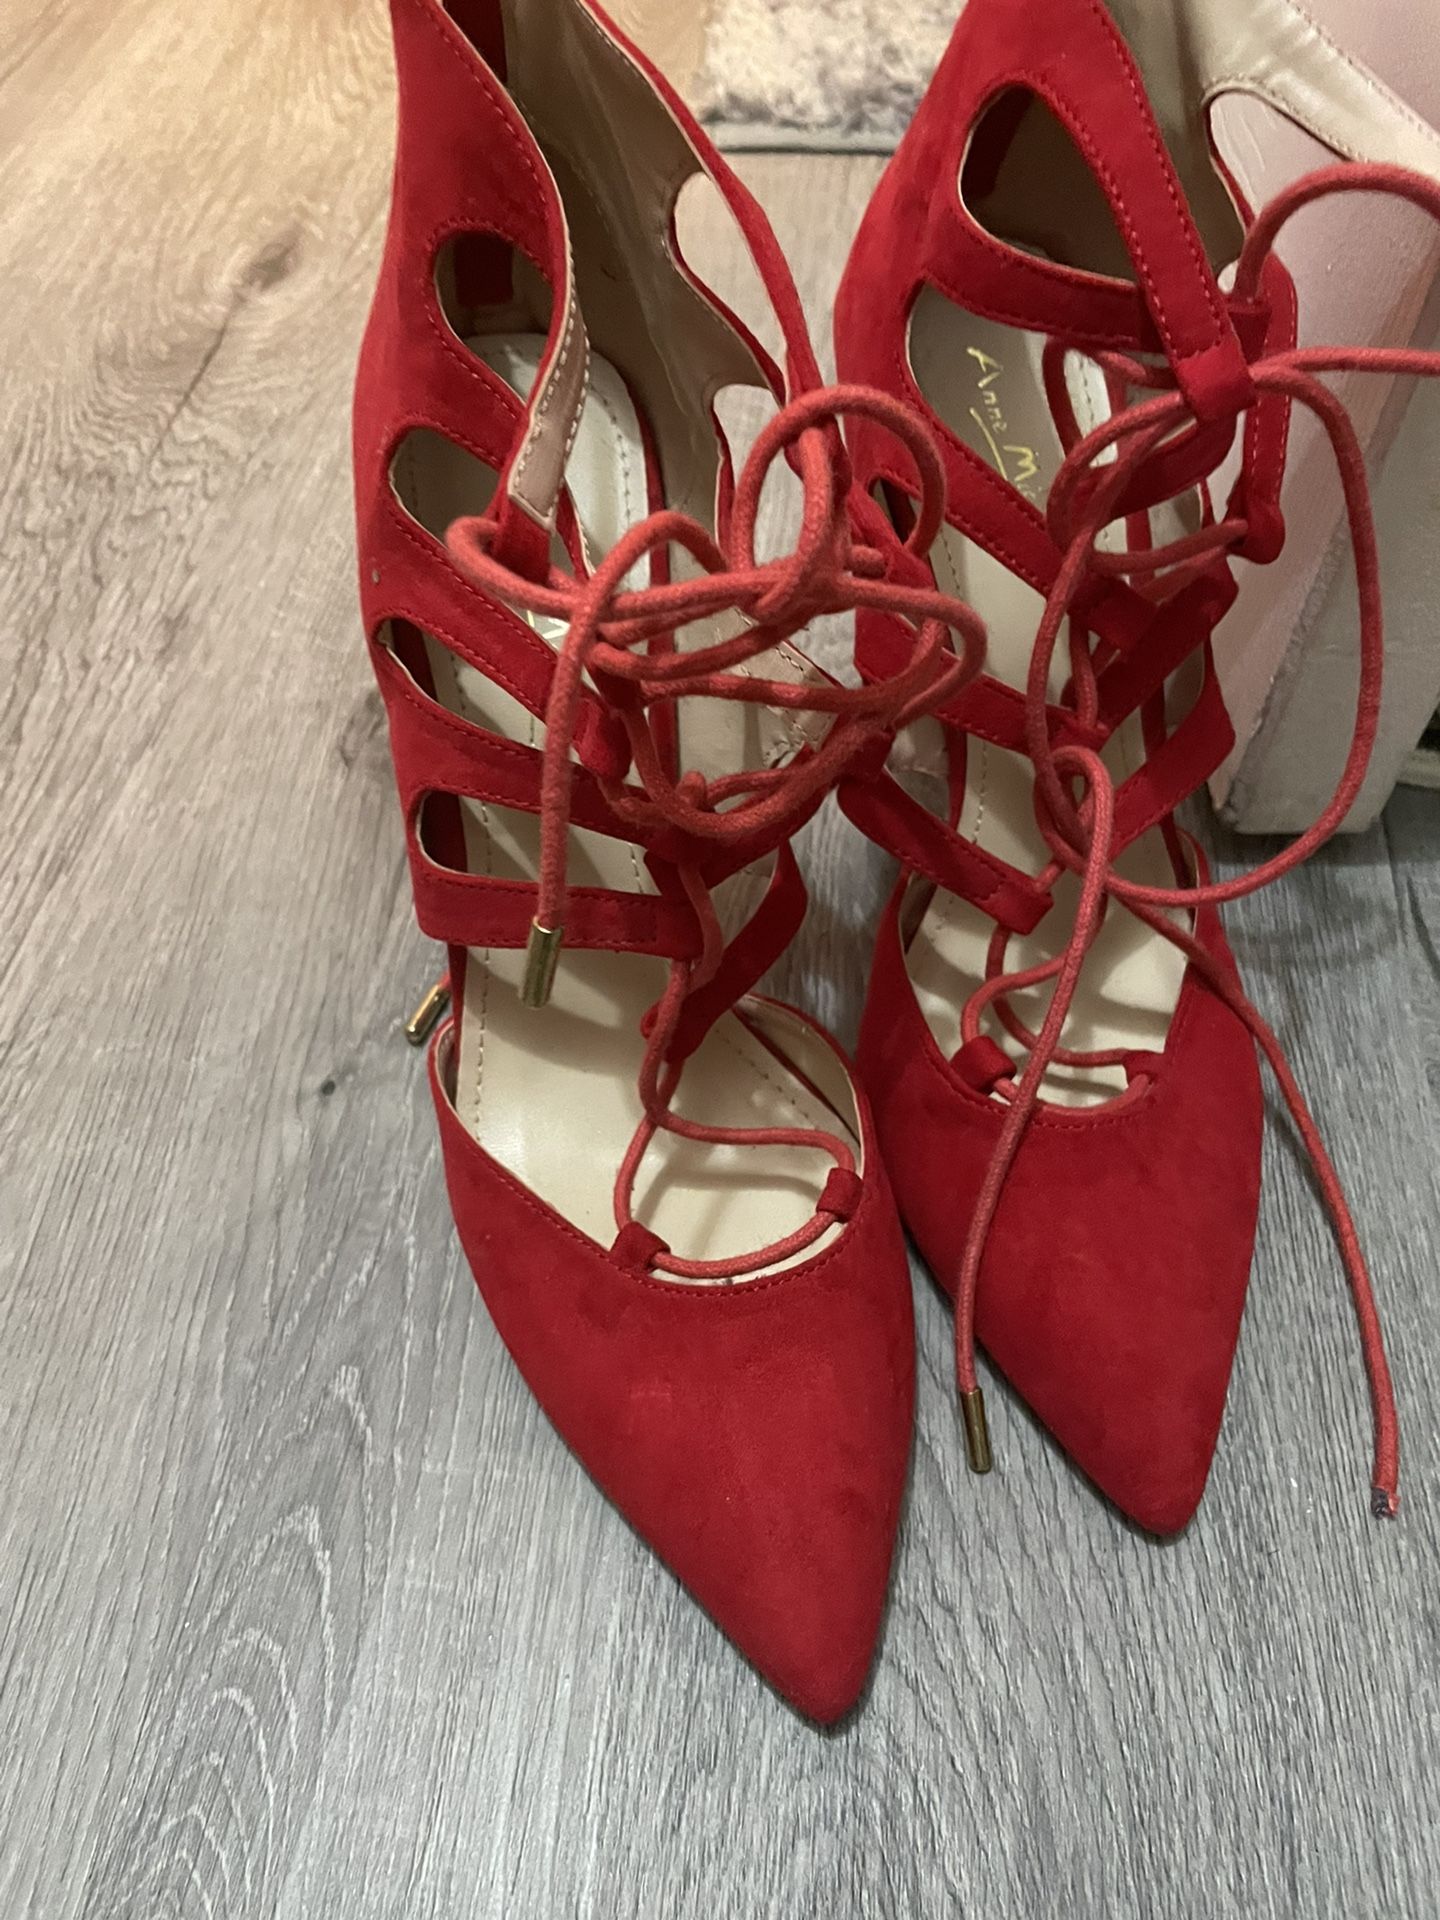 Brand New Red High Heels Size 8,5